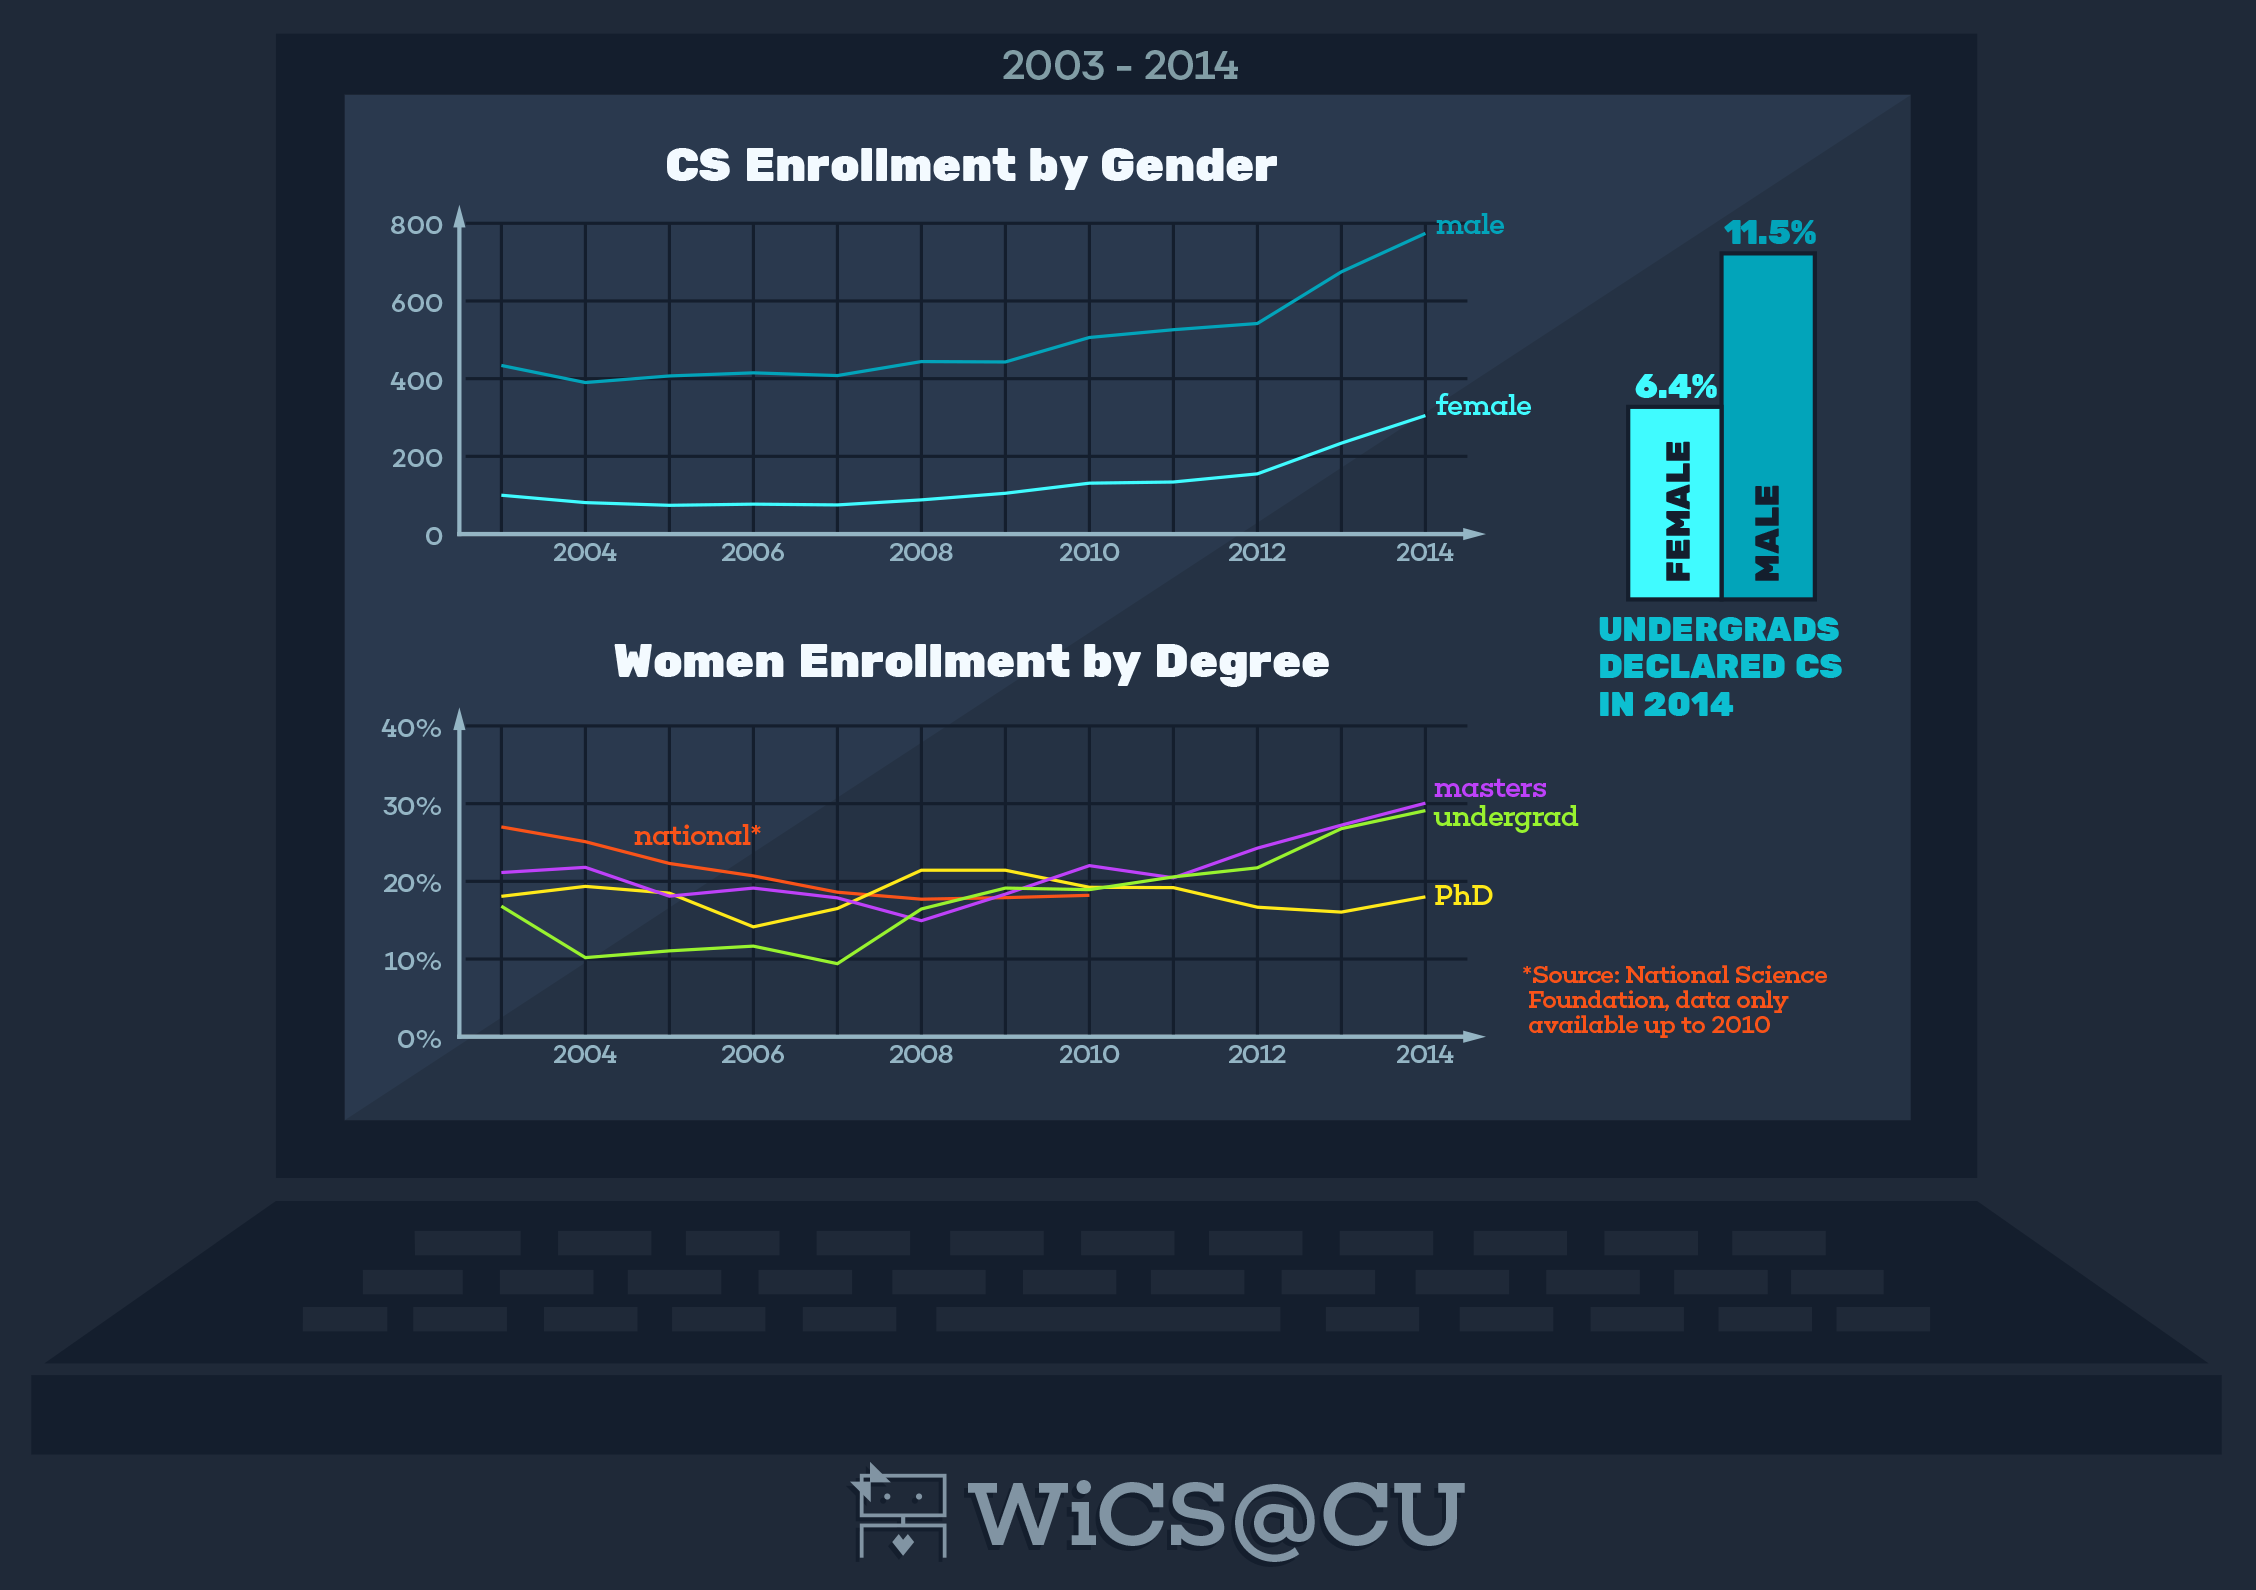 Changes in female enrollment over time at different class levels